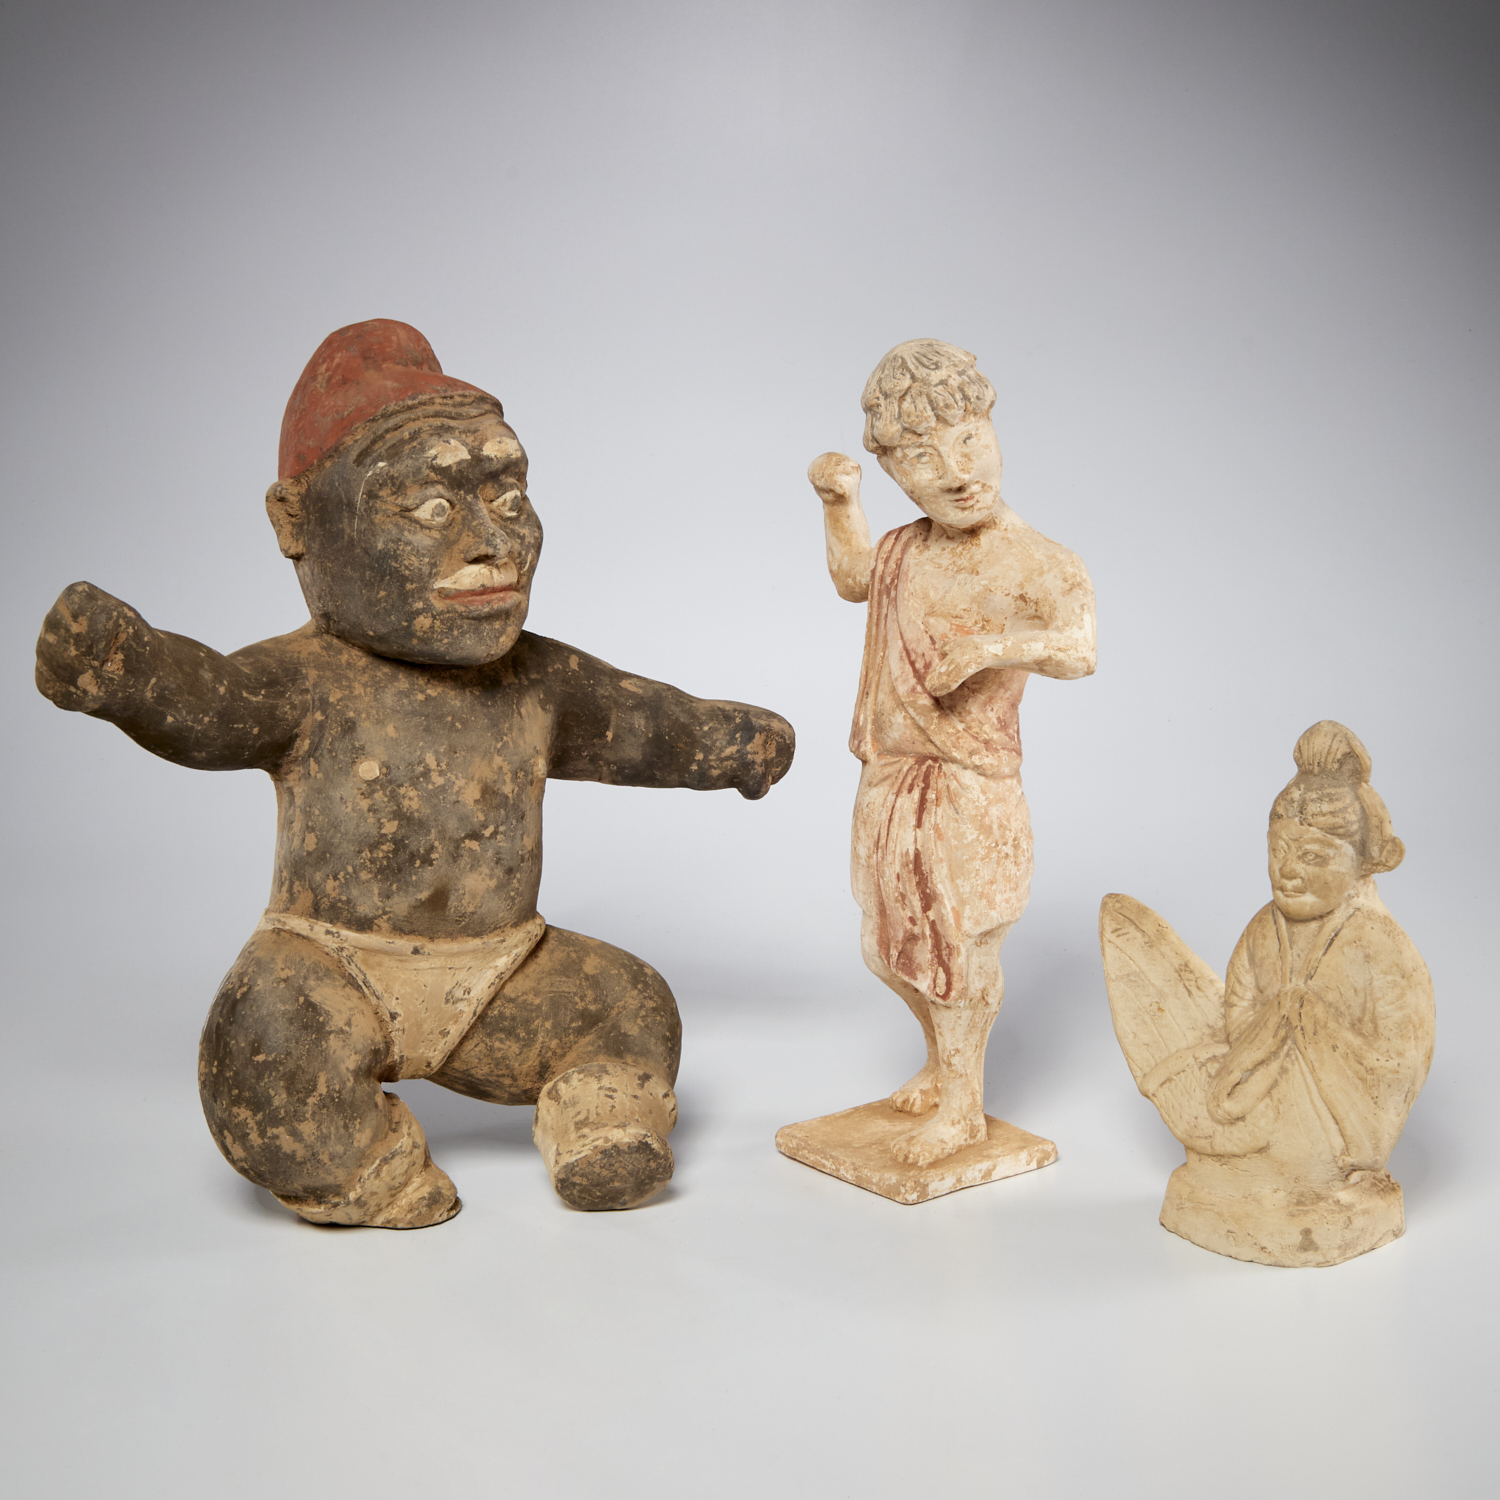  3 CHINESE HAN STYLE POTTERY FIGURES 30c0d3